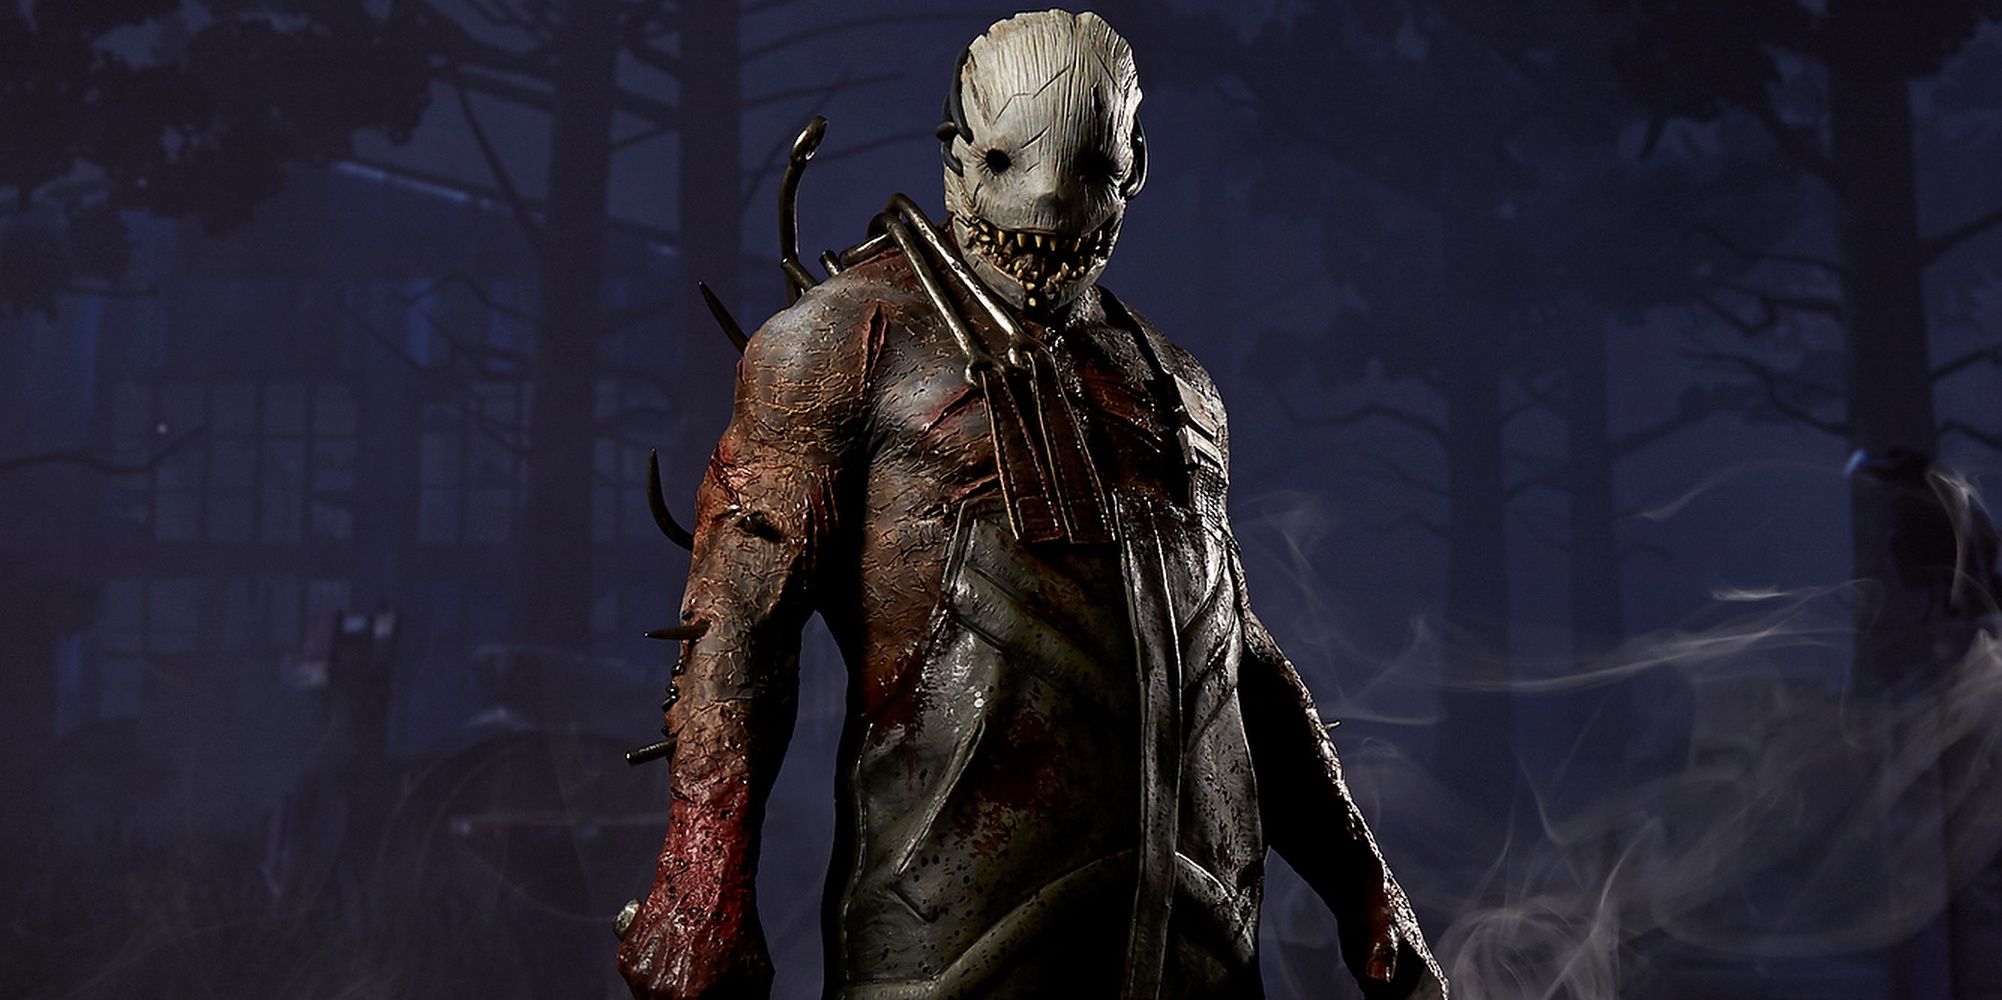 Dead By Daylight: Character Model For Trapper Killer